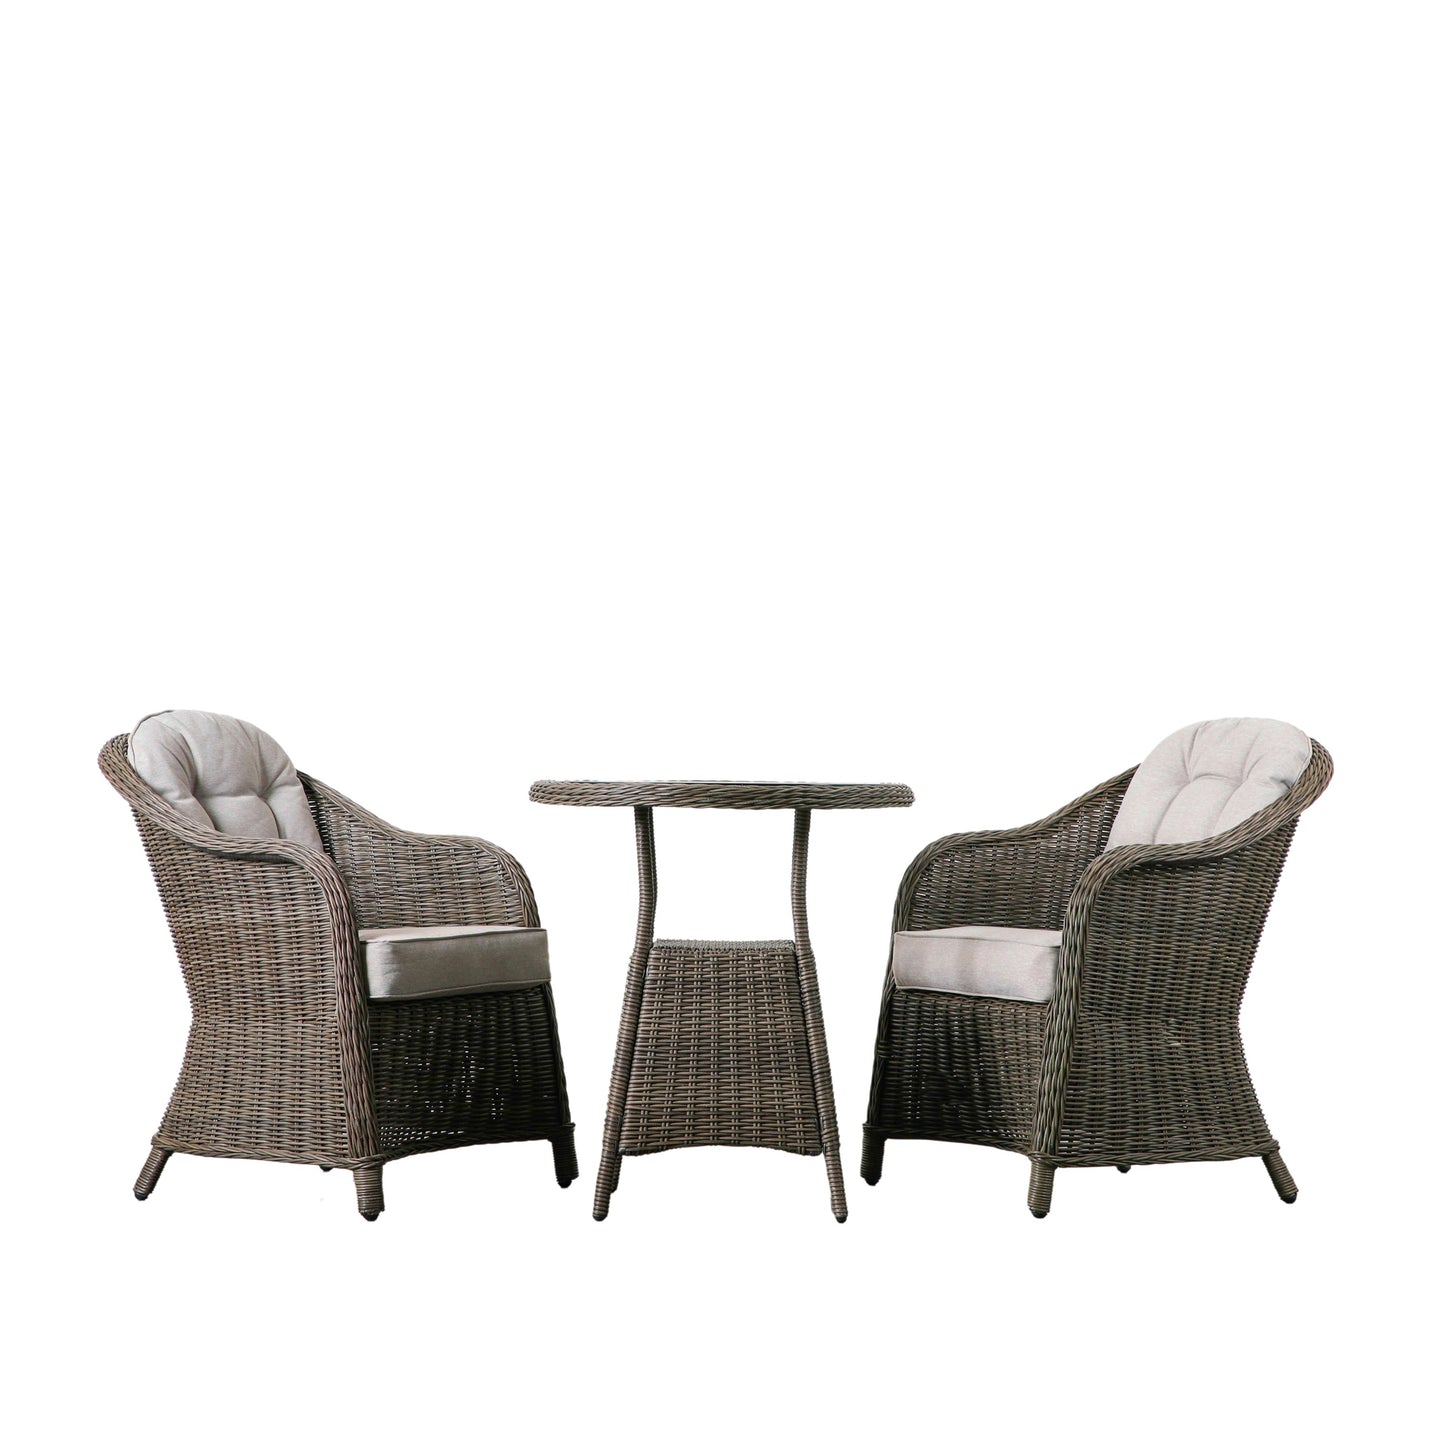 Two Meavy 2 Seater Bistro Set Natural chairs and a table for interior decor/home furniture on a white background.